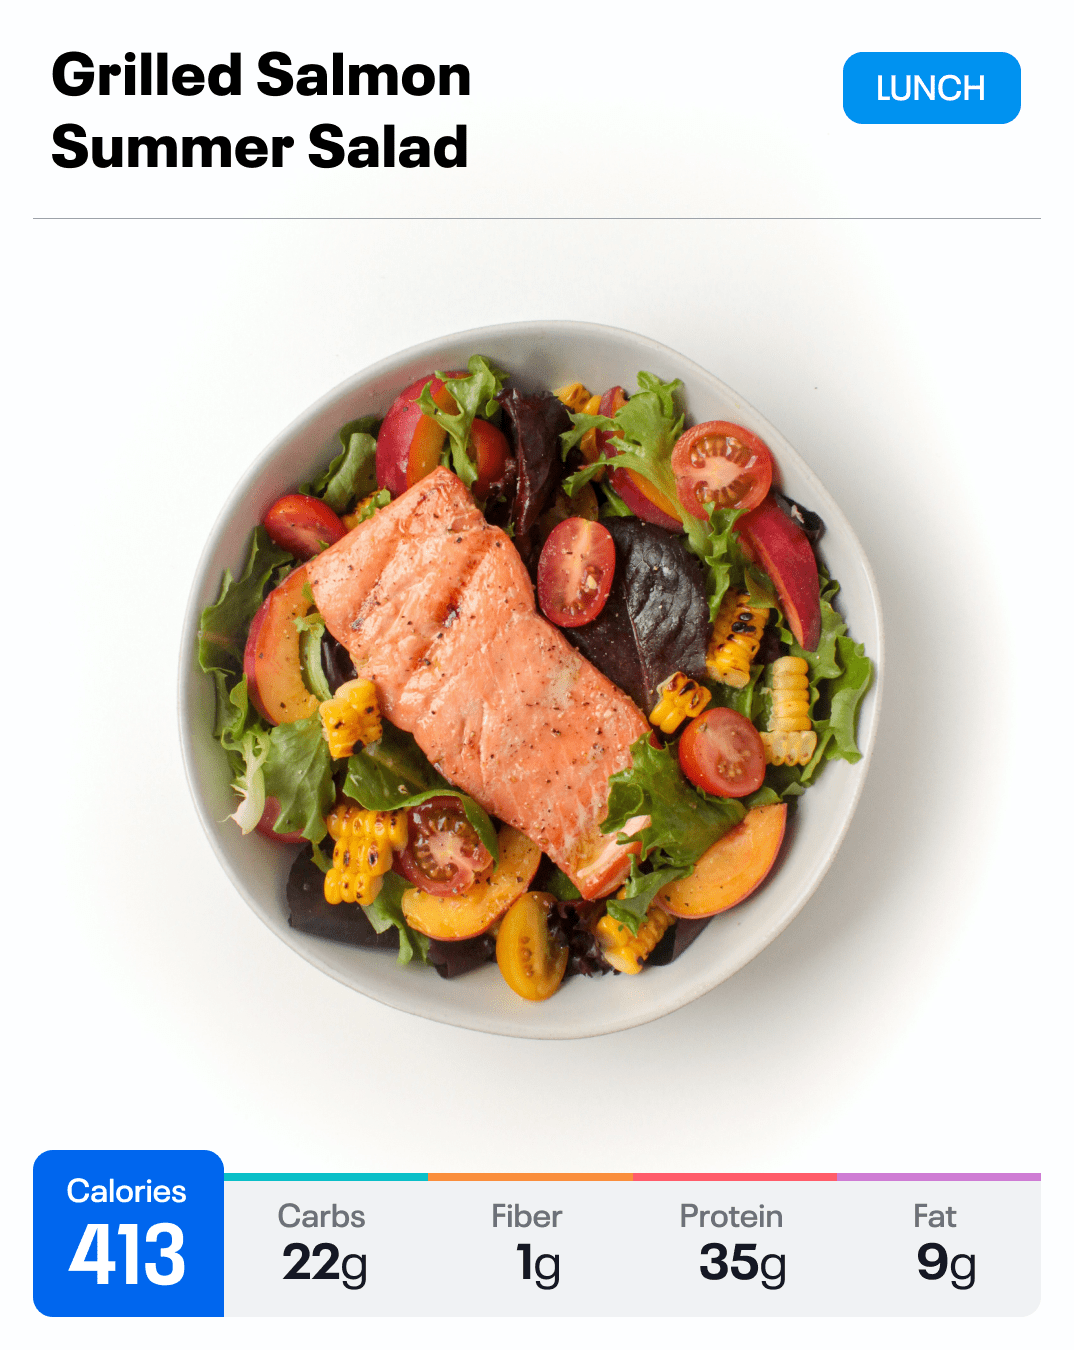 What 1,500 Calories Looks Like (Summer Edition)